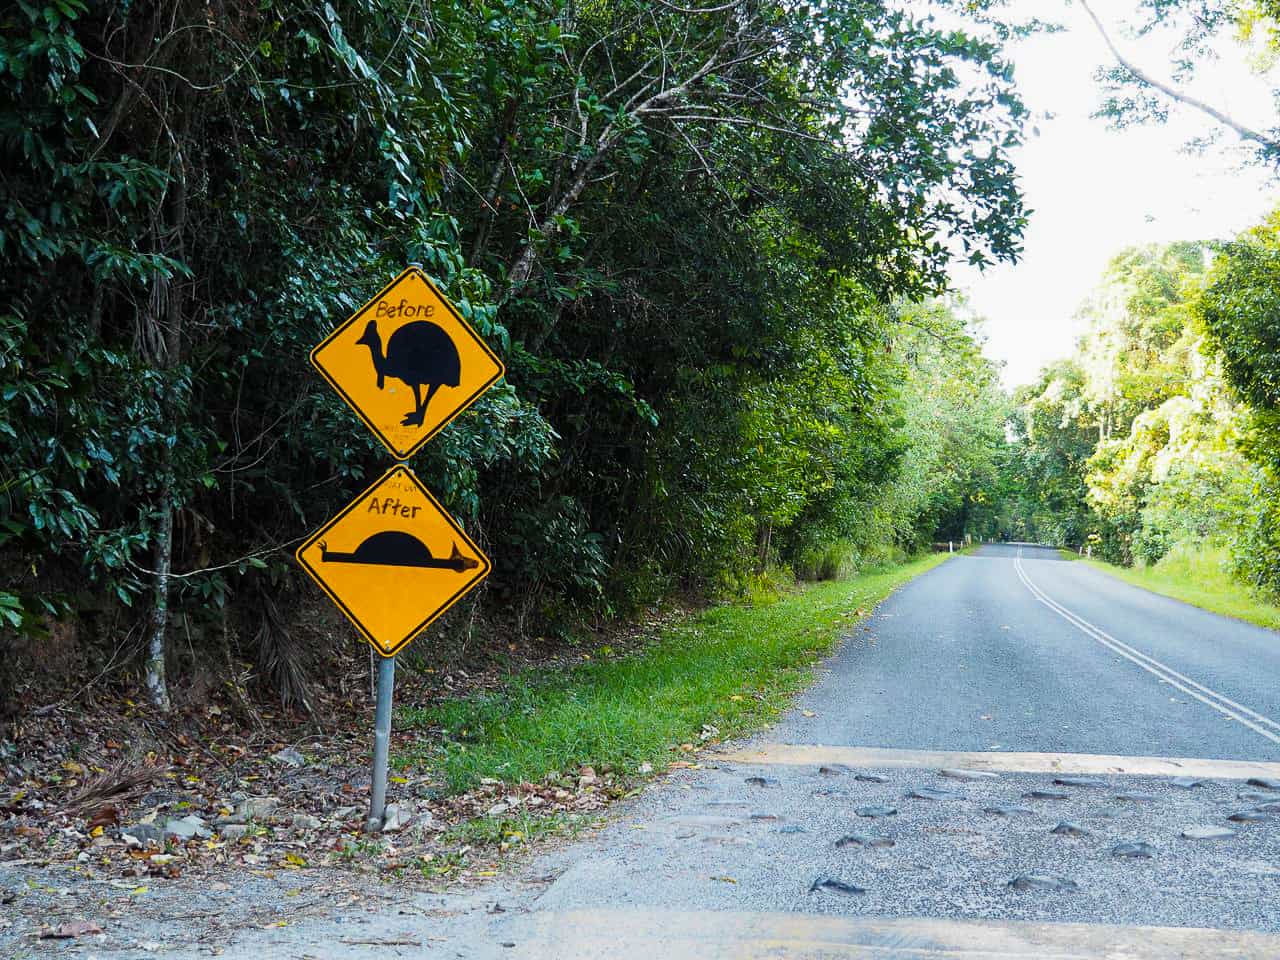 Cassowary before and after warning sign in the Daintree Rainforest, Australia // Travel Mermaid